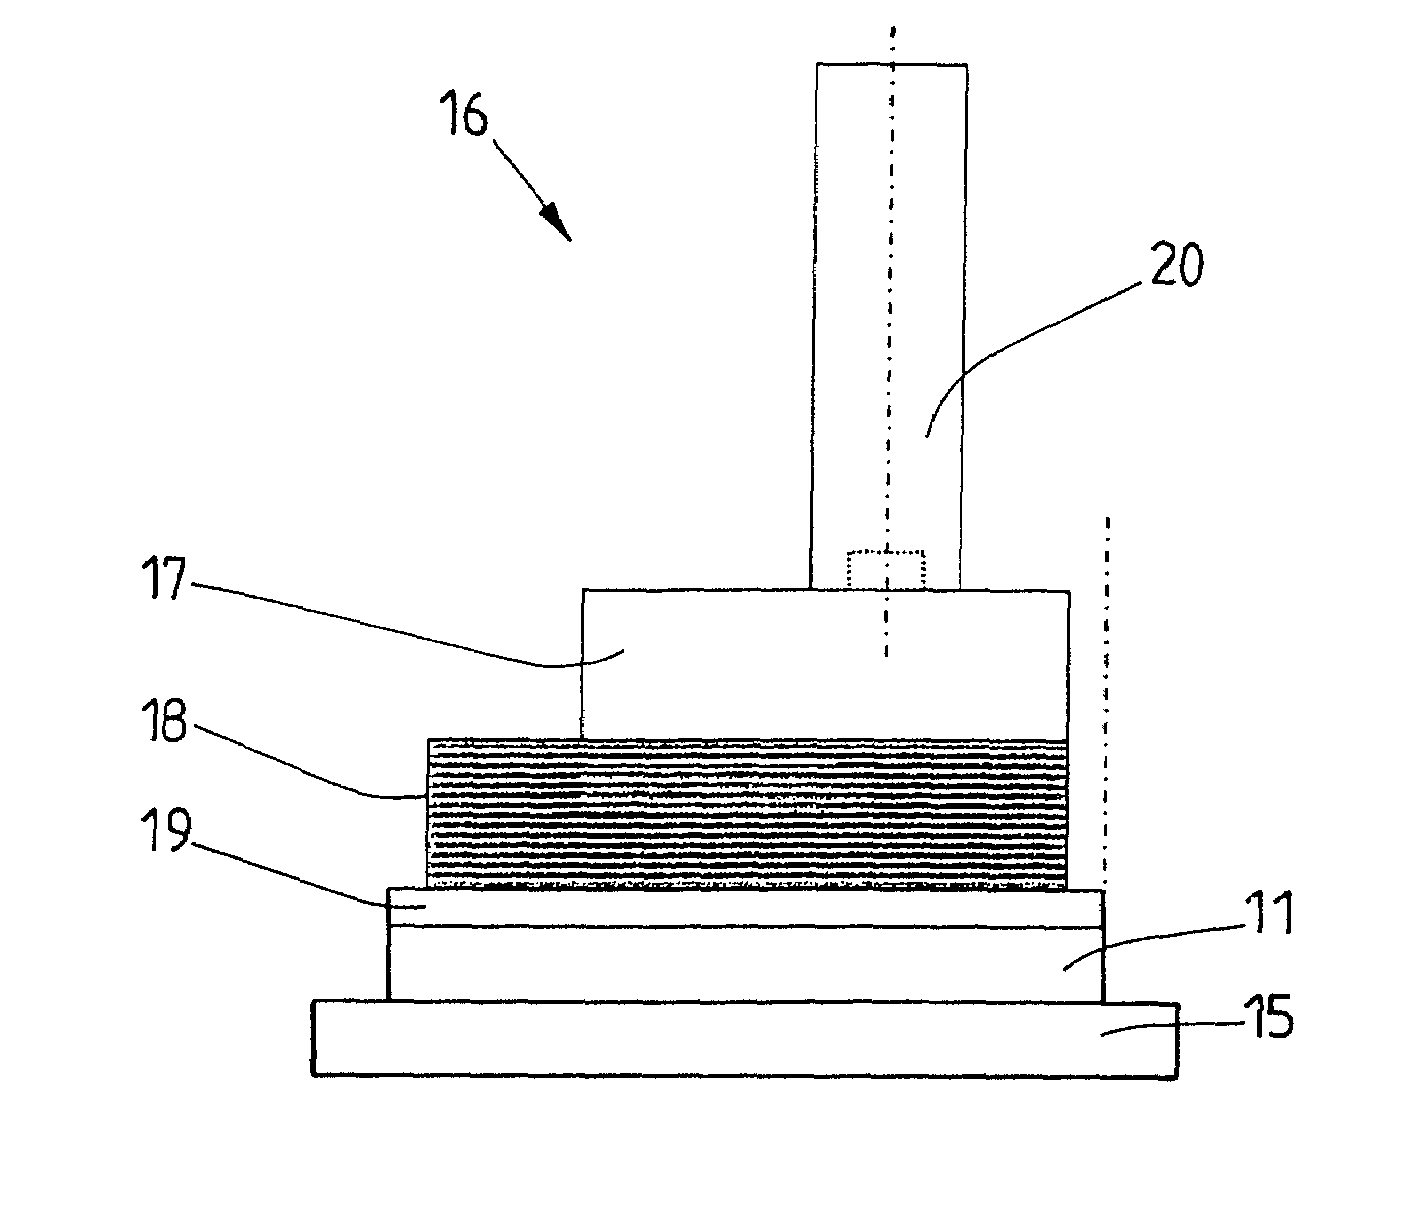 Method for converting a trimming machine for the preferably three-sided trimming of a stack of sheets